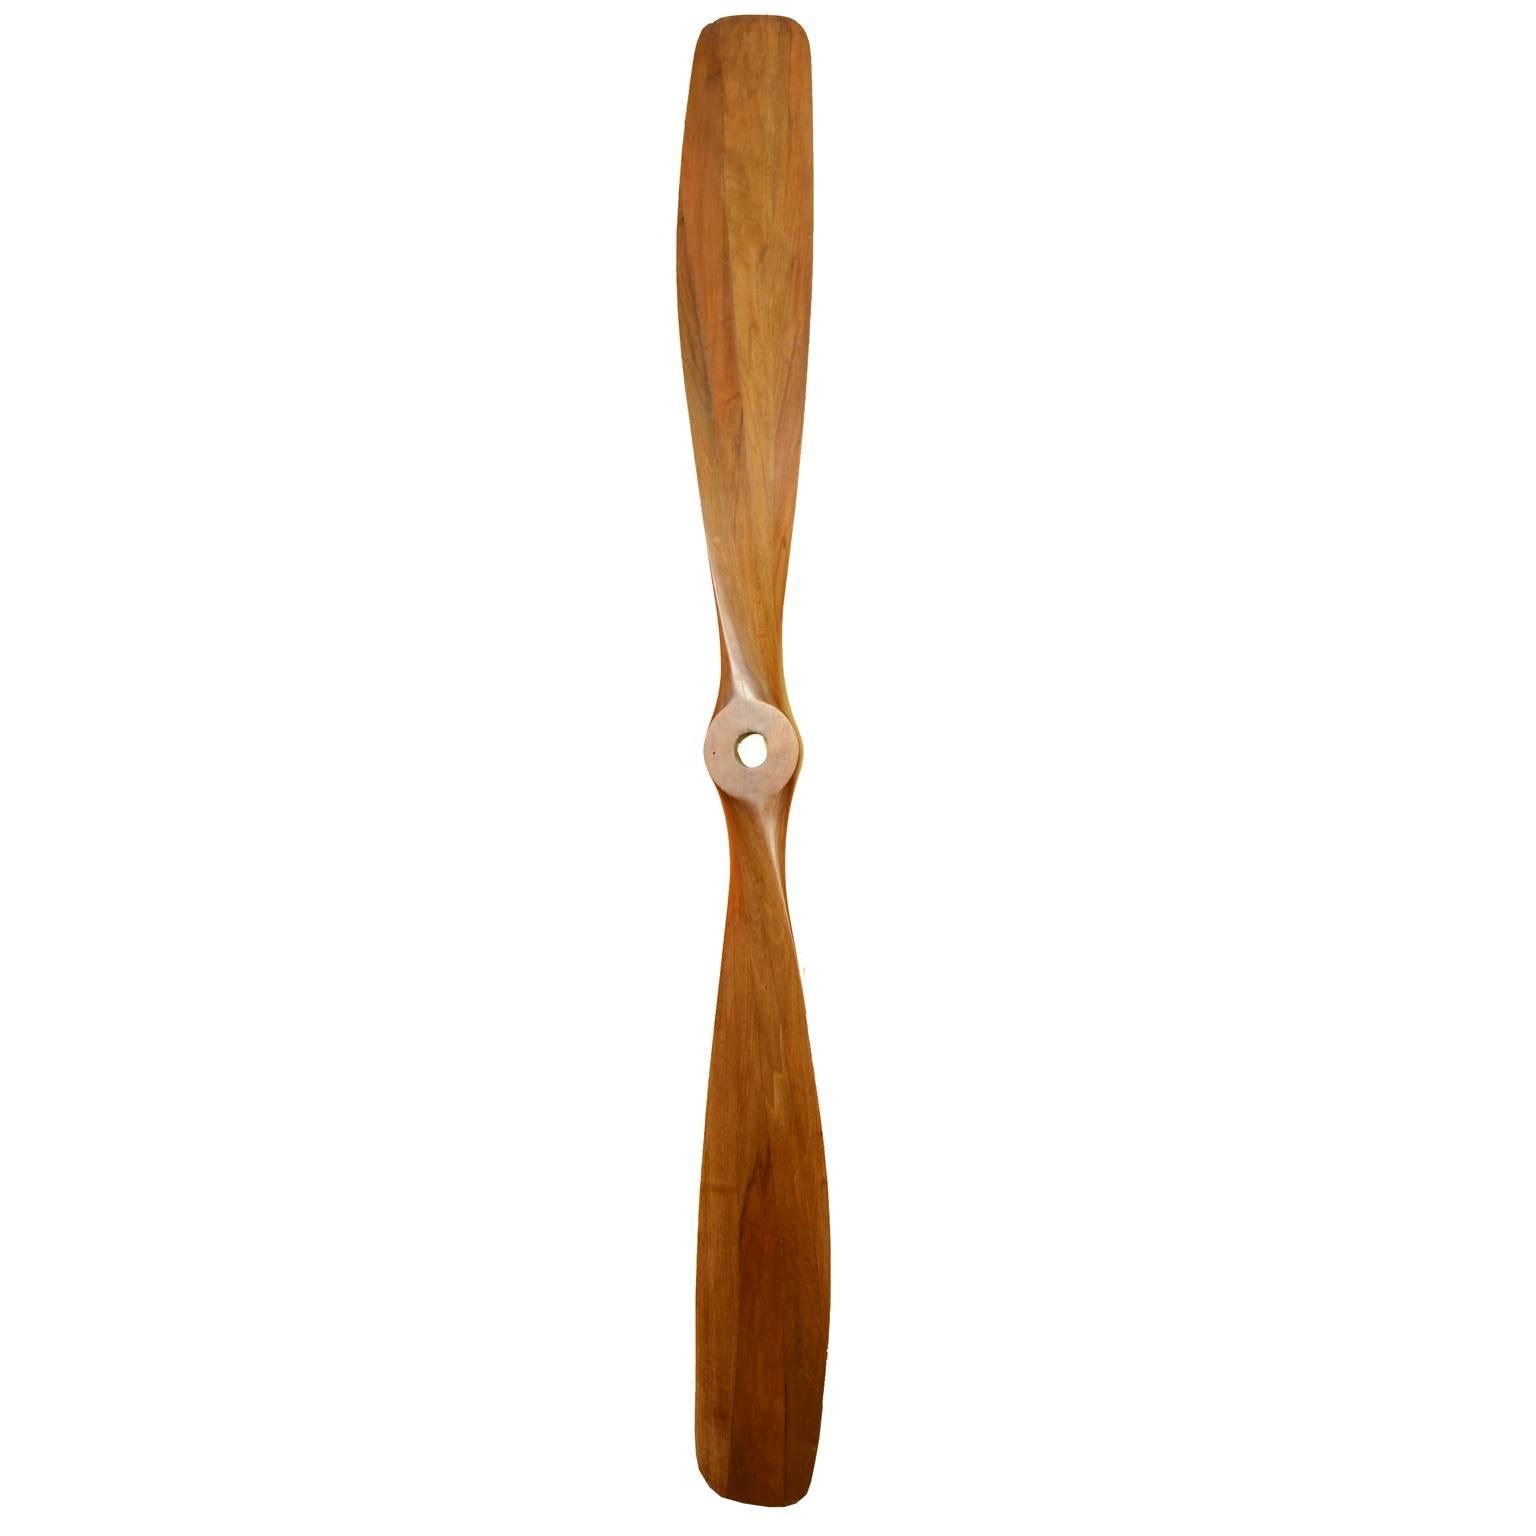 Antique aircraft propeller, laminated walnut wooden, French manufacture, 1917 circa. Cm 17x11.5x260 - inches 6.69x4.52x102.3. Very good condition. 
It's a Régy propeller, spare and never used propeller, built in 1917 circa, produced by Les Fils de